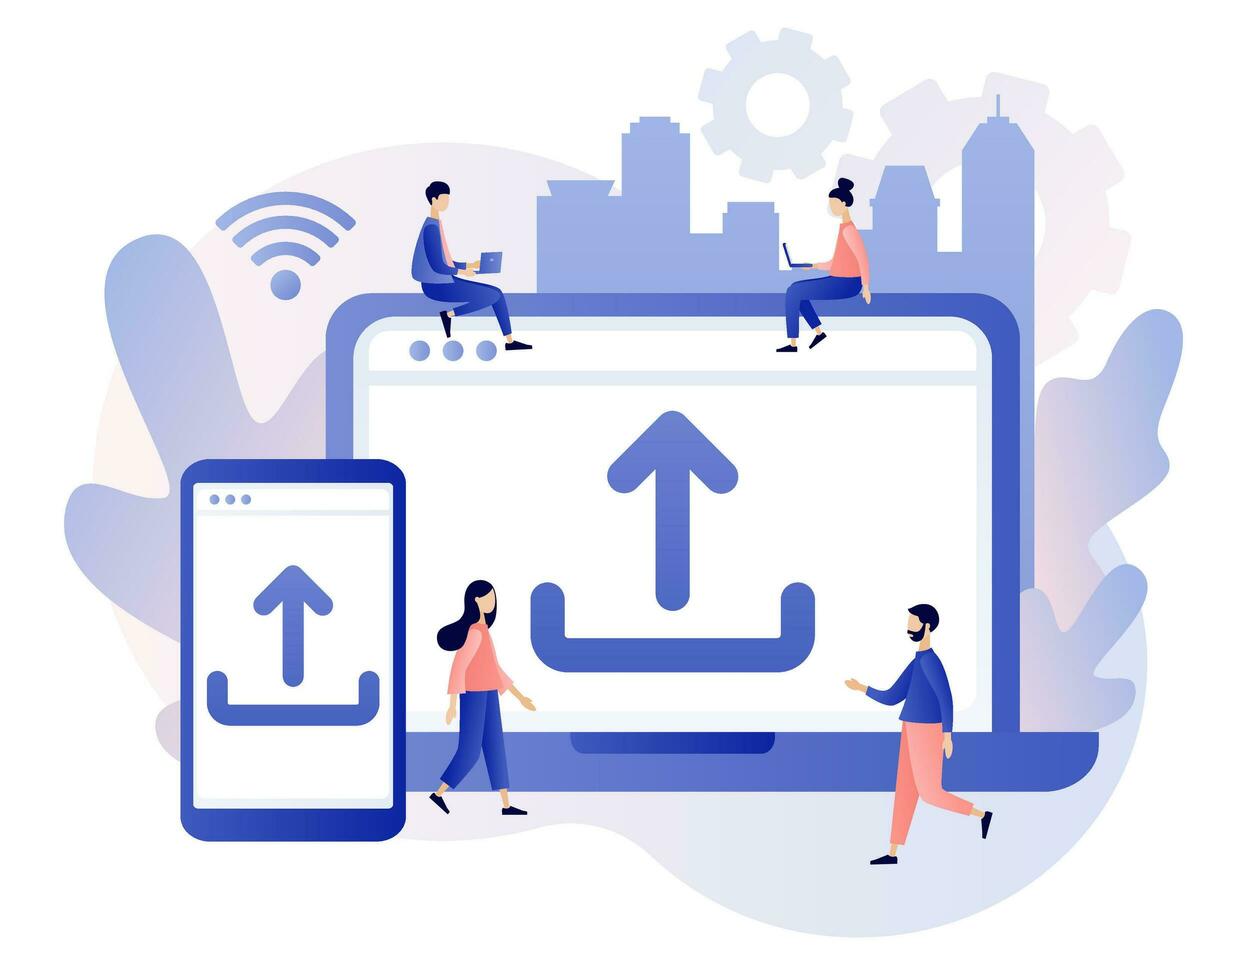 Upload symbol. Load sign. Tiny people uploading data, files from smartphone and laptop. Data exchange concept. Modern flat cartoon style. Vector illustration on white background